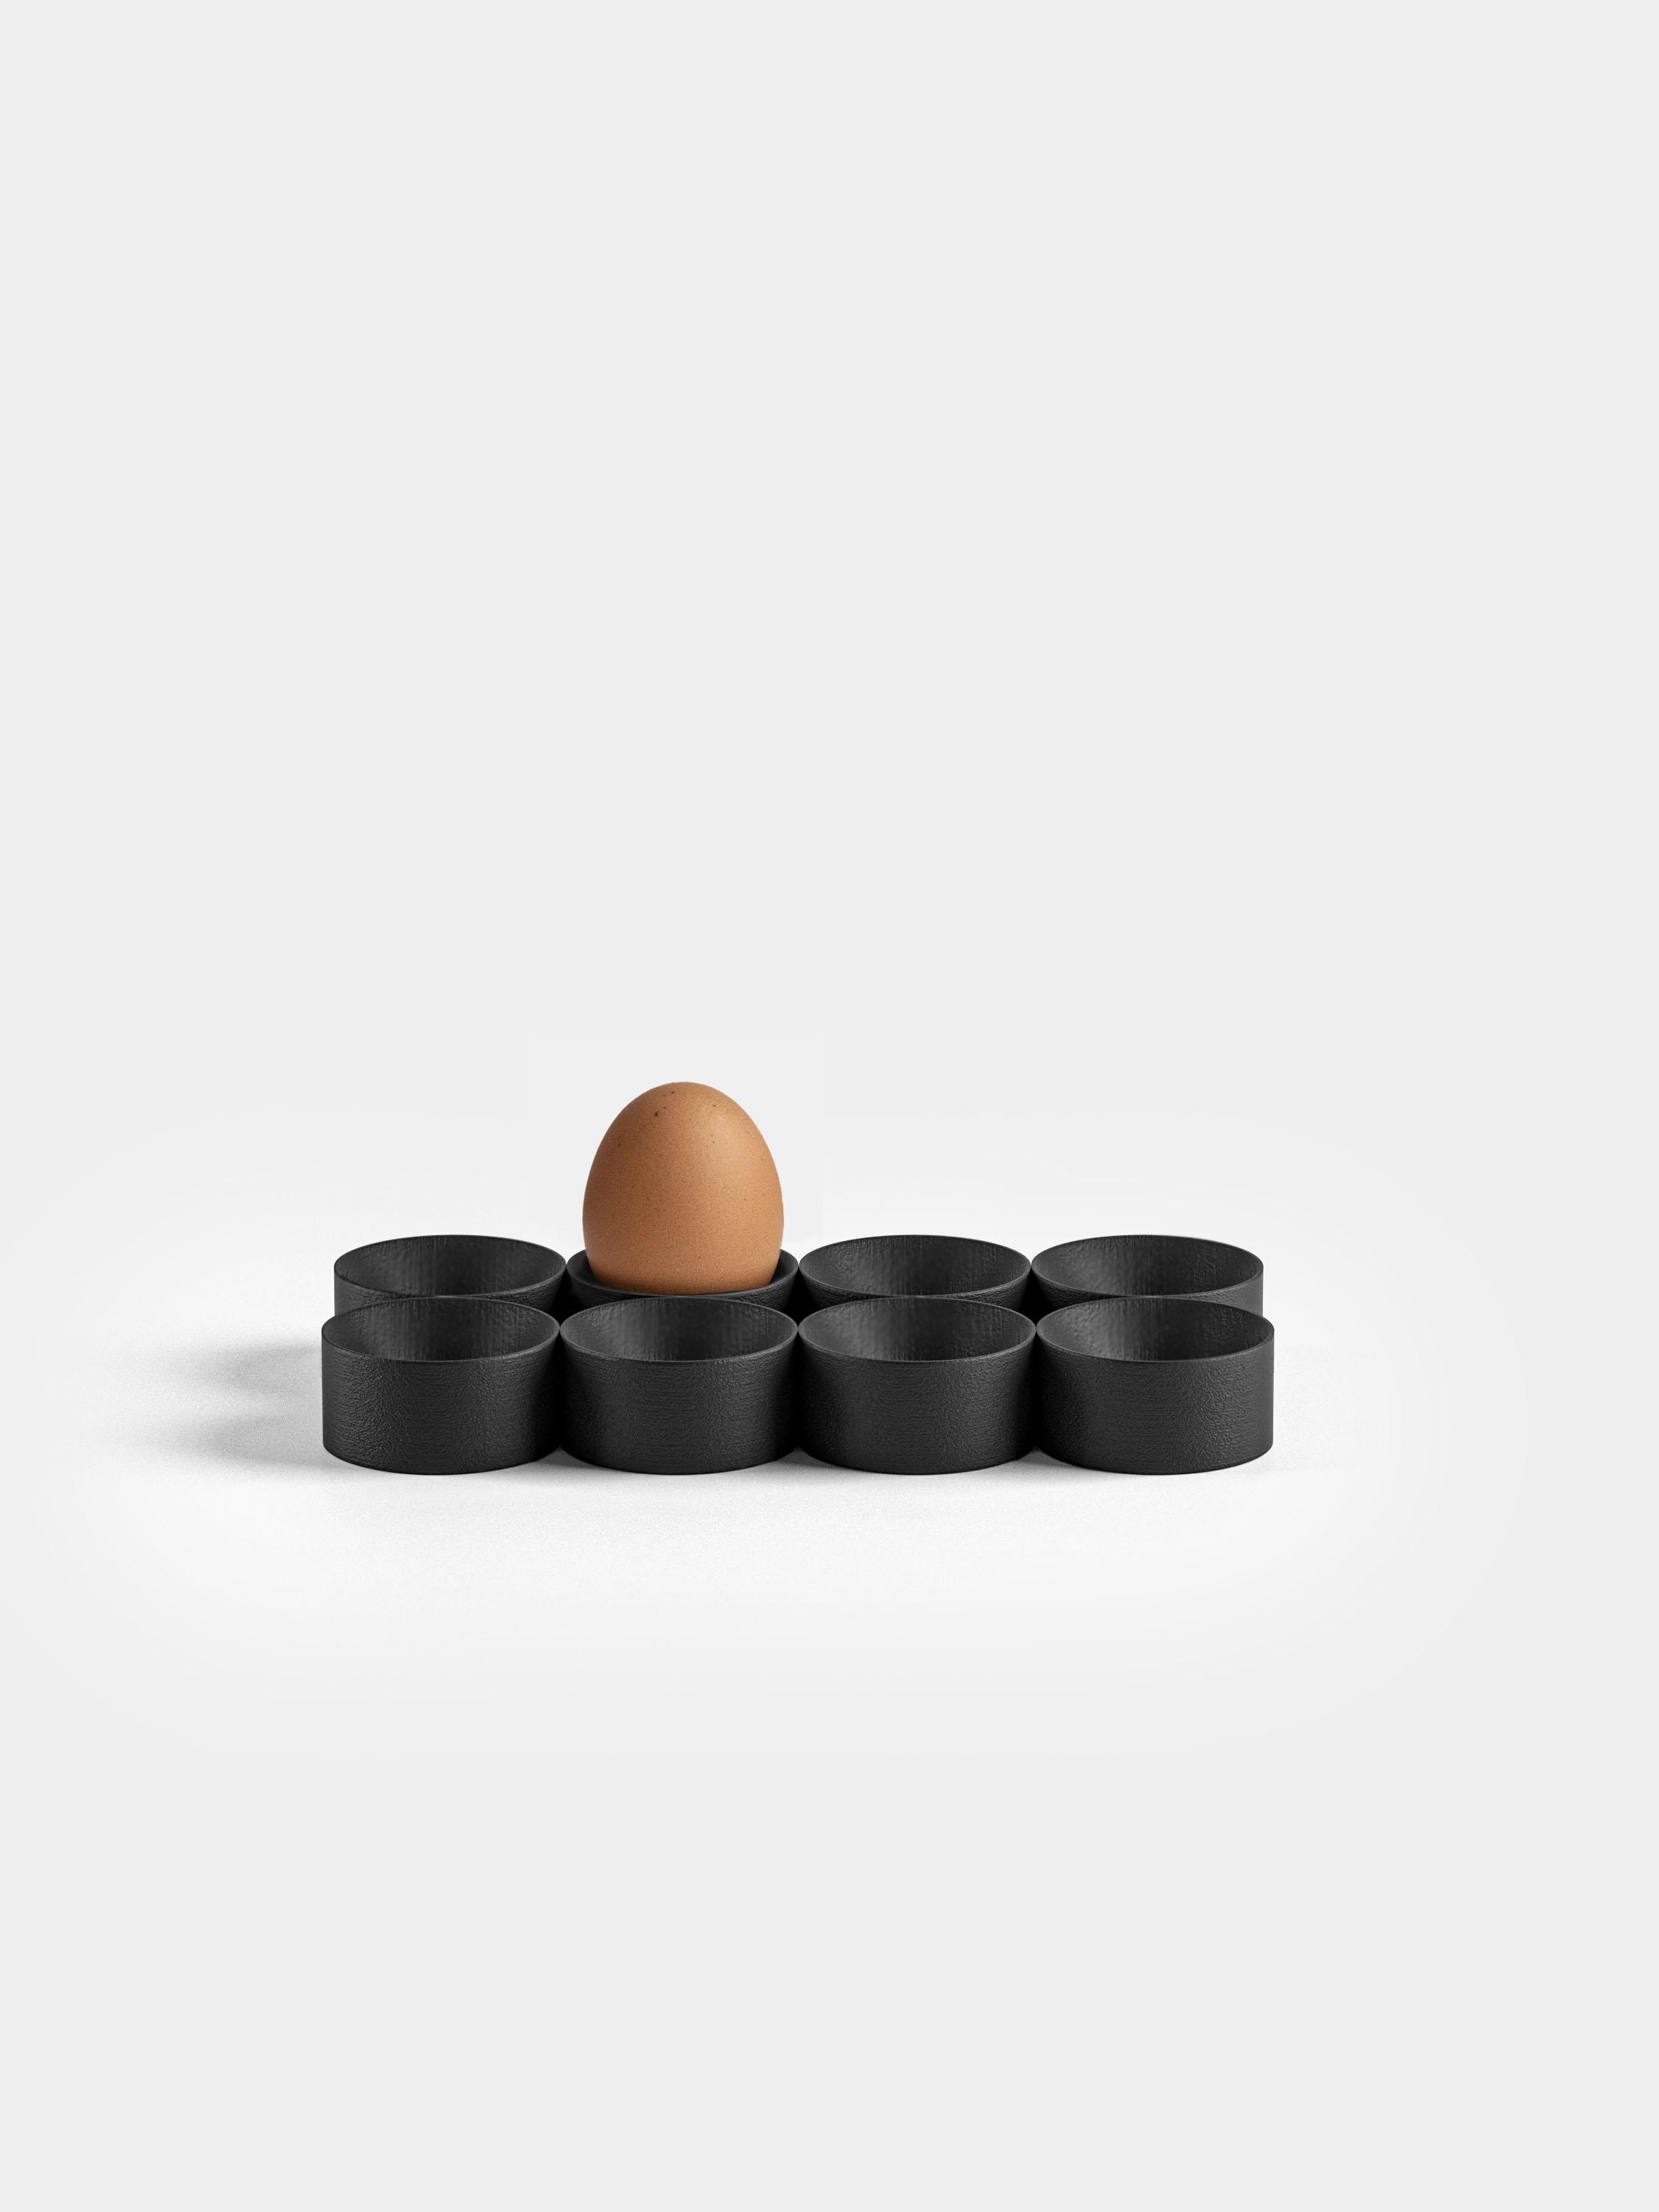 Chicken or the egg 3d model